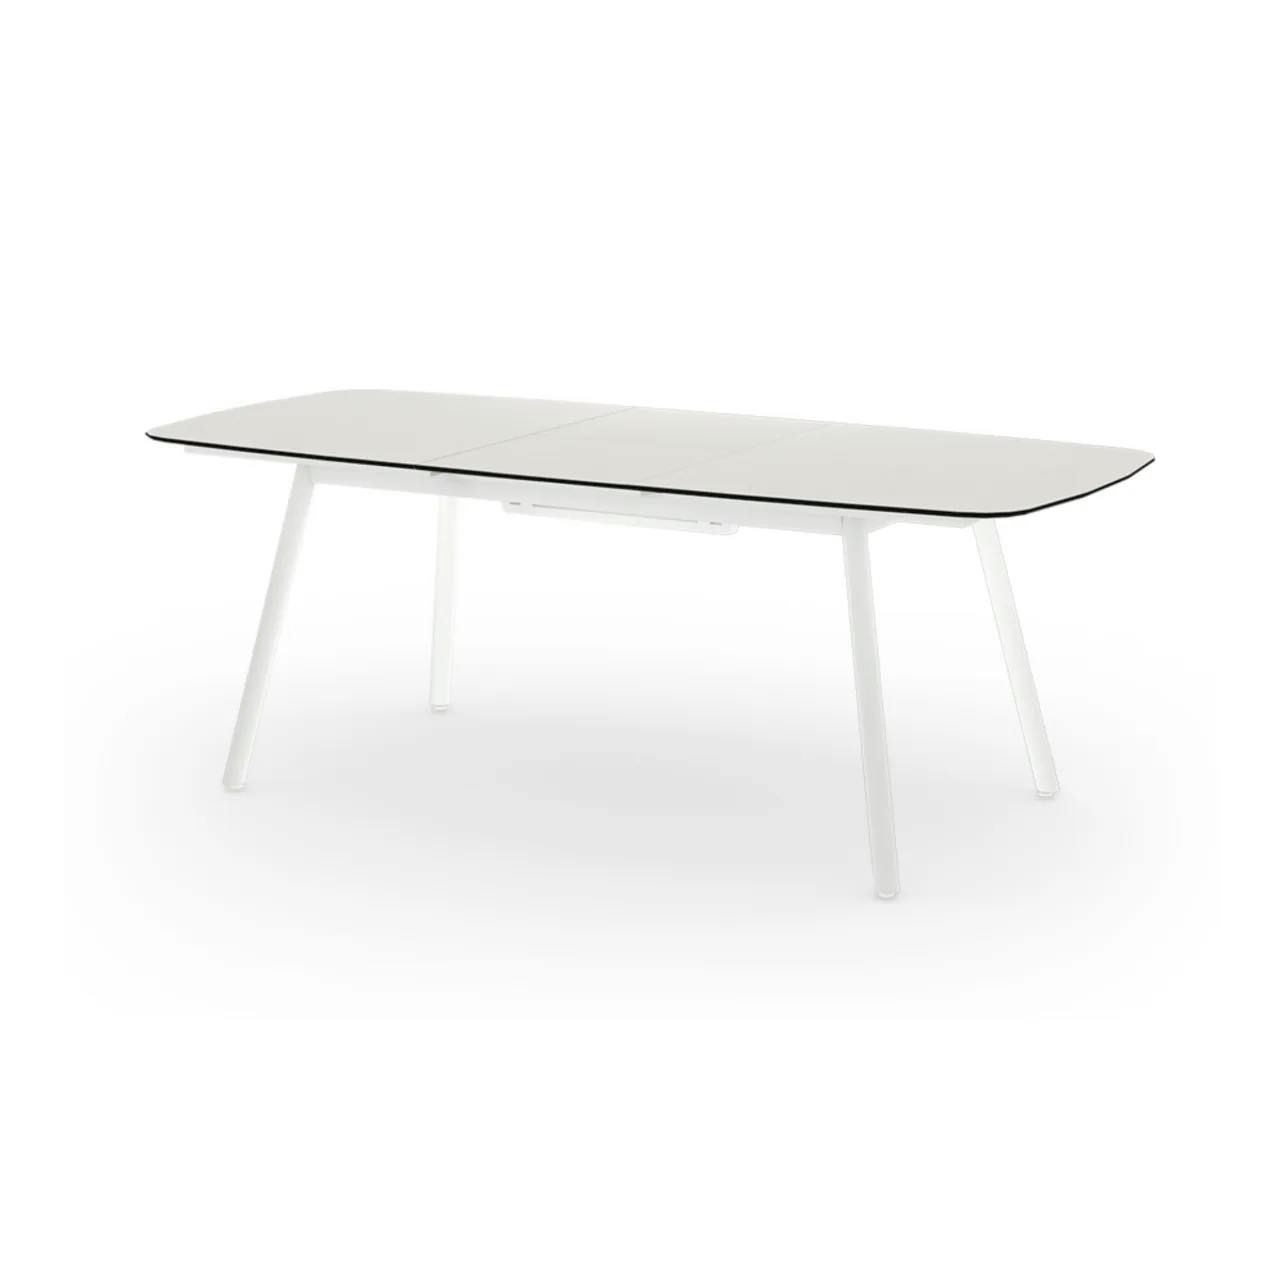 MAMAGREEN Zupy 65"-85" Extension Table | Frame: Aluminum, White | Tabletop: HPL, Alpes White